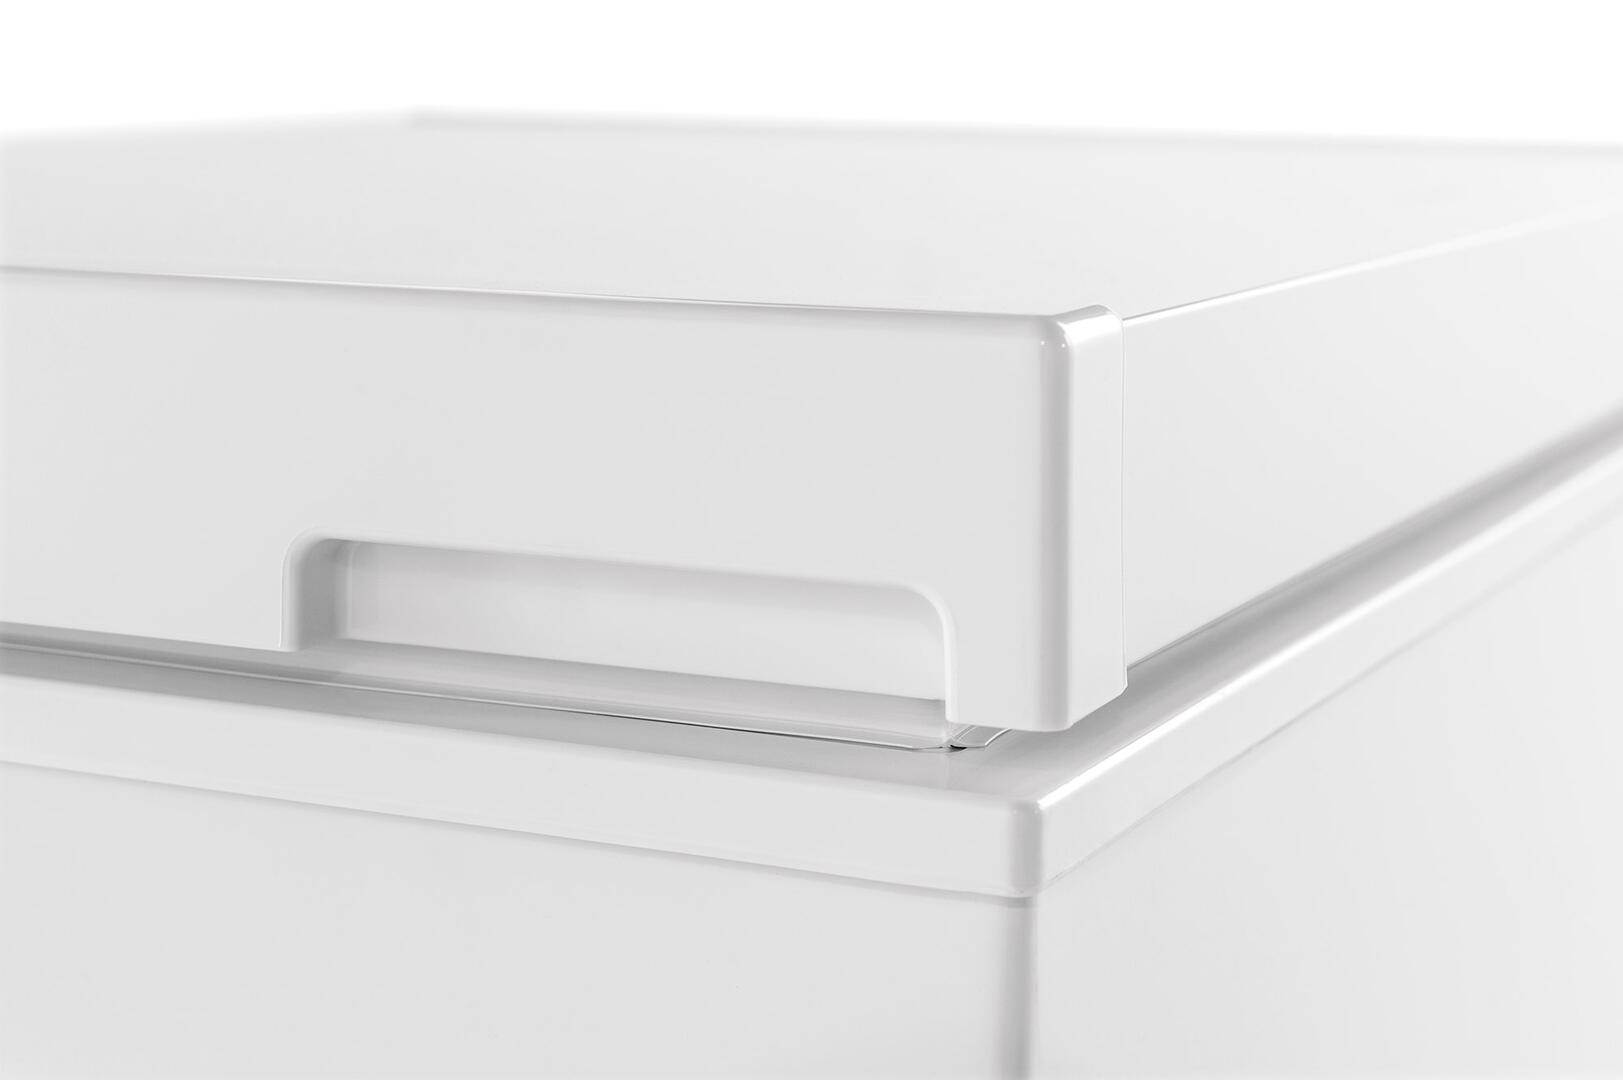 FFFC09M1RW Energy Efficient Chest Freezer with 8.7 Cu. Ft. Capacity Power-on Indicator Light Store-More Removable Basket and Adjustable Temperature Control in White - image 4 of 11